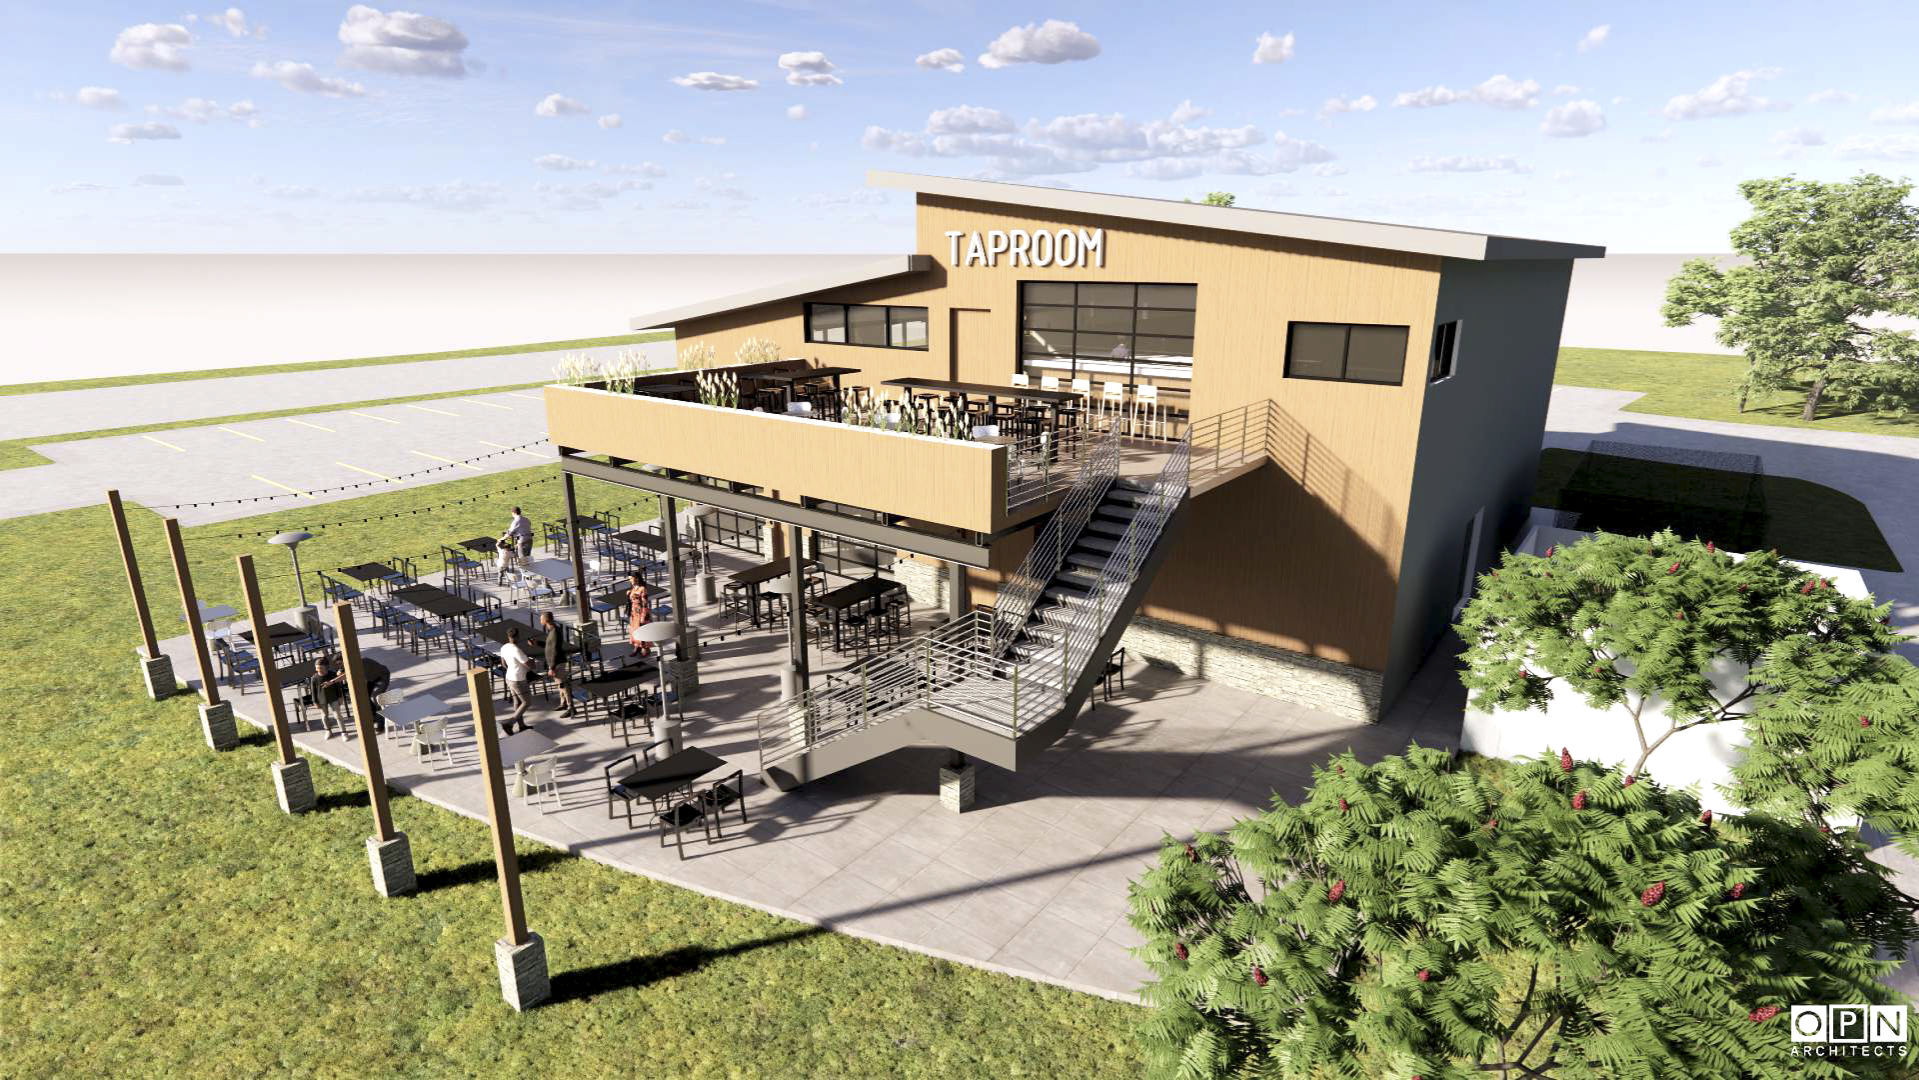 This rendering shows a proposed taproom to be constructed in Peosta, Iowa, and open this fall. A new location for Jumble Coffee Co. is planned across the street from the taproom. PHOTO CREDIT: Contributed